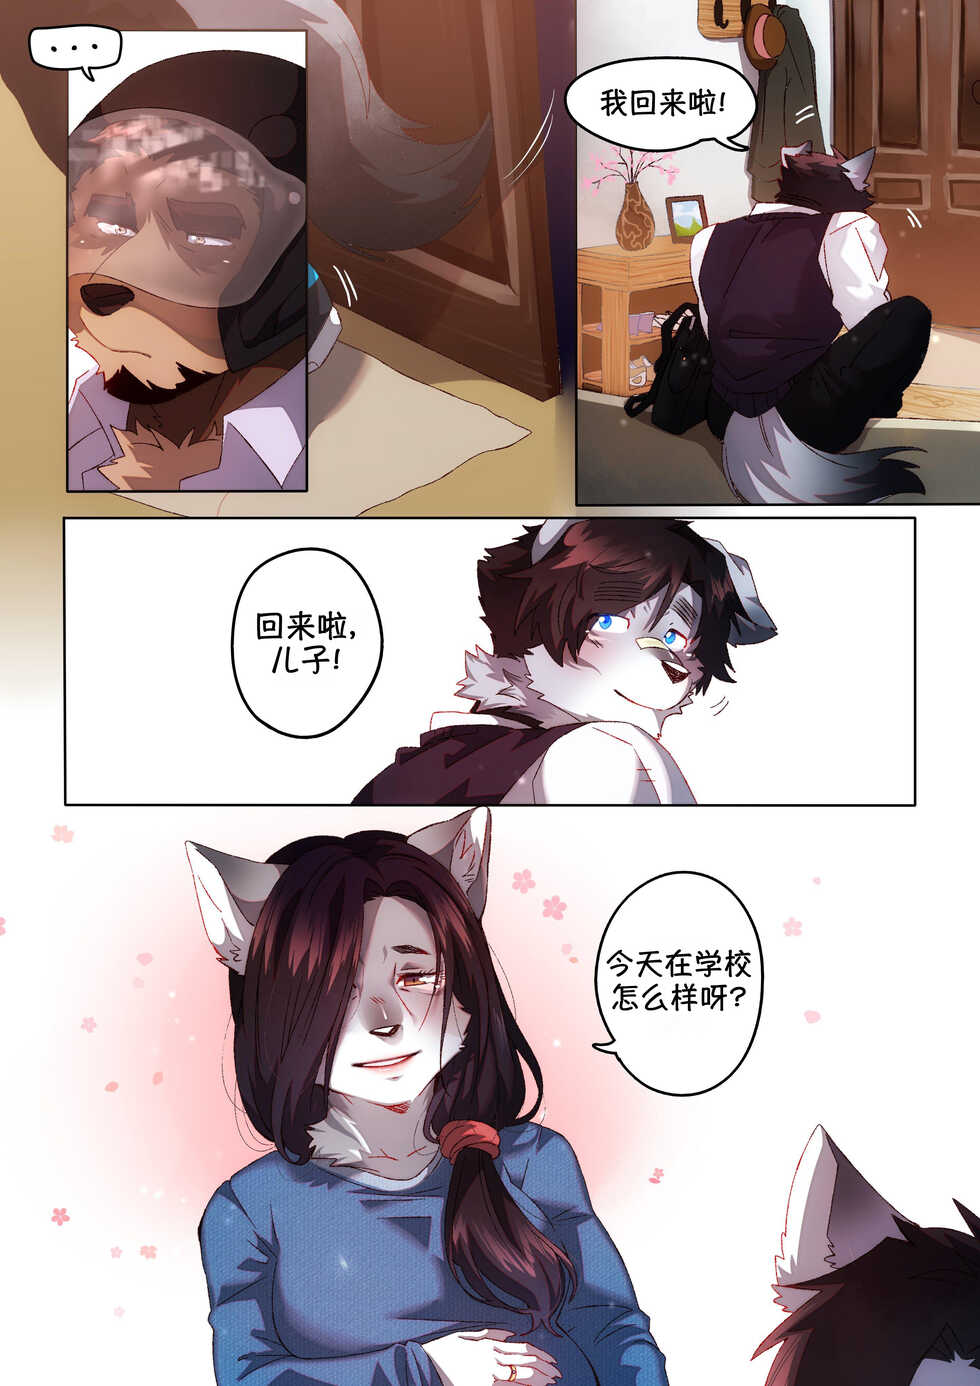 [BooBoo] Passionate Affection 深挚 [Chinese Ver.]  Ongoing - Page 19